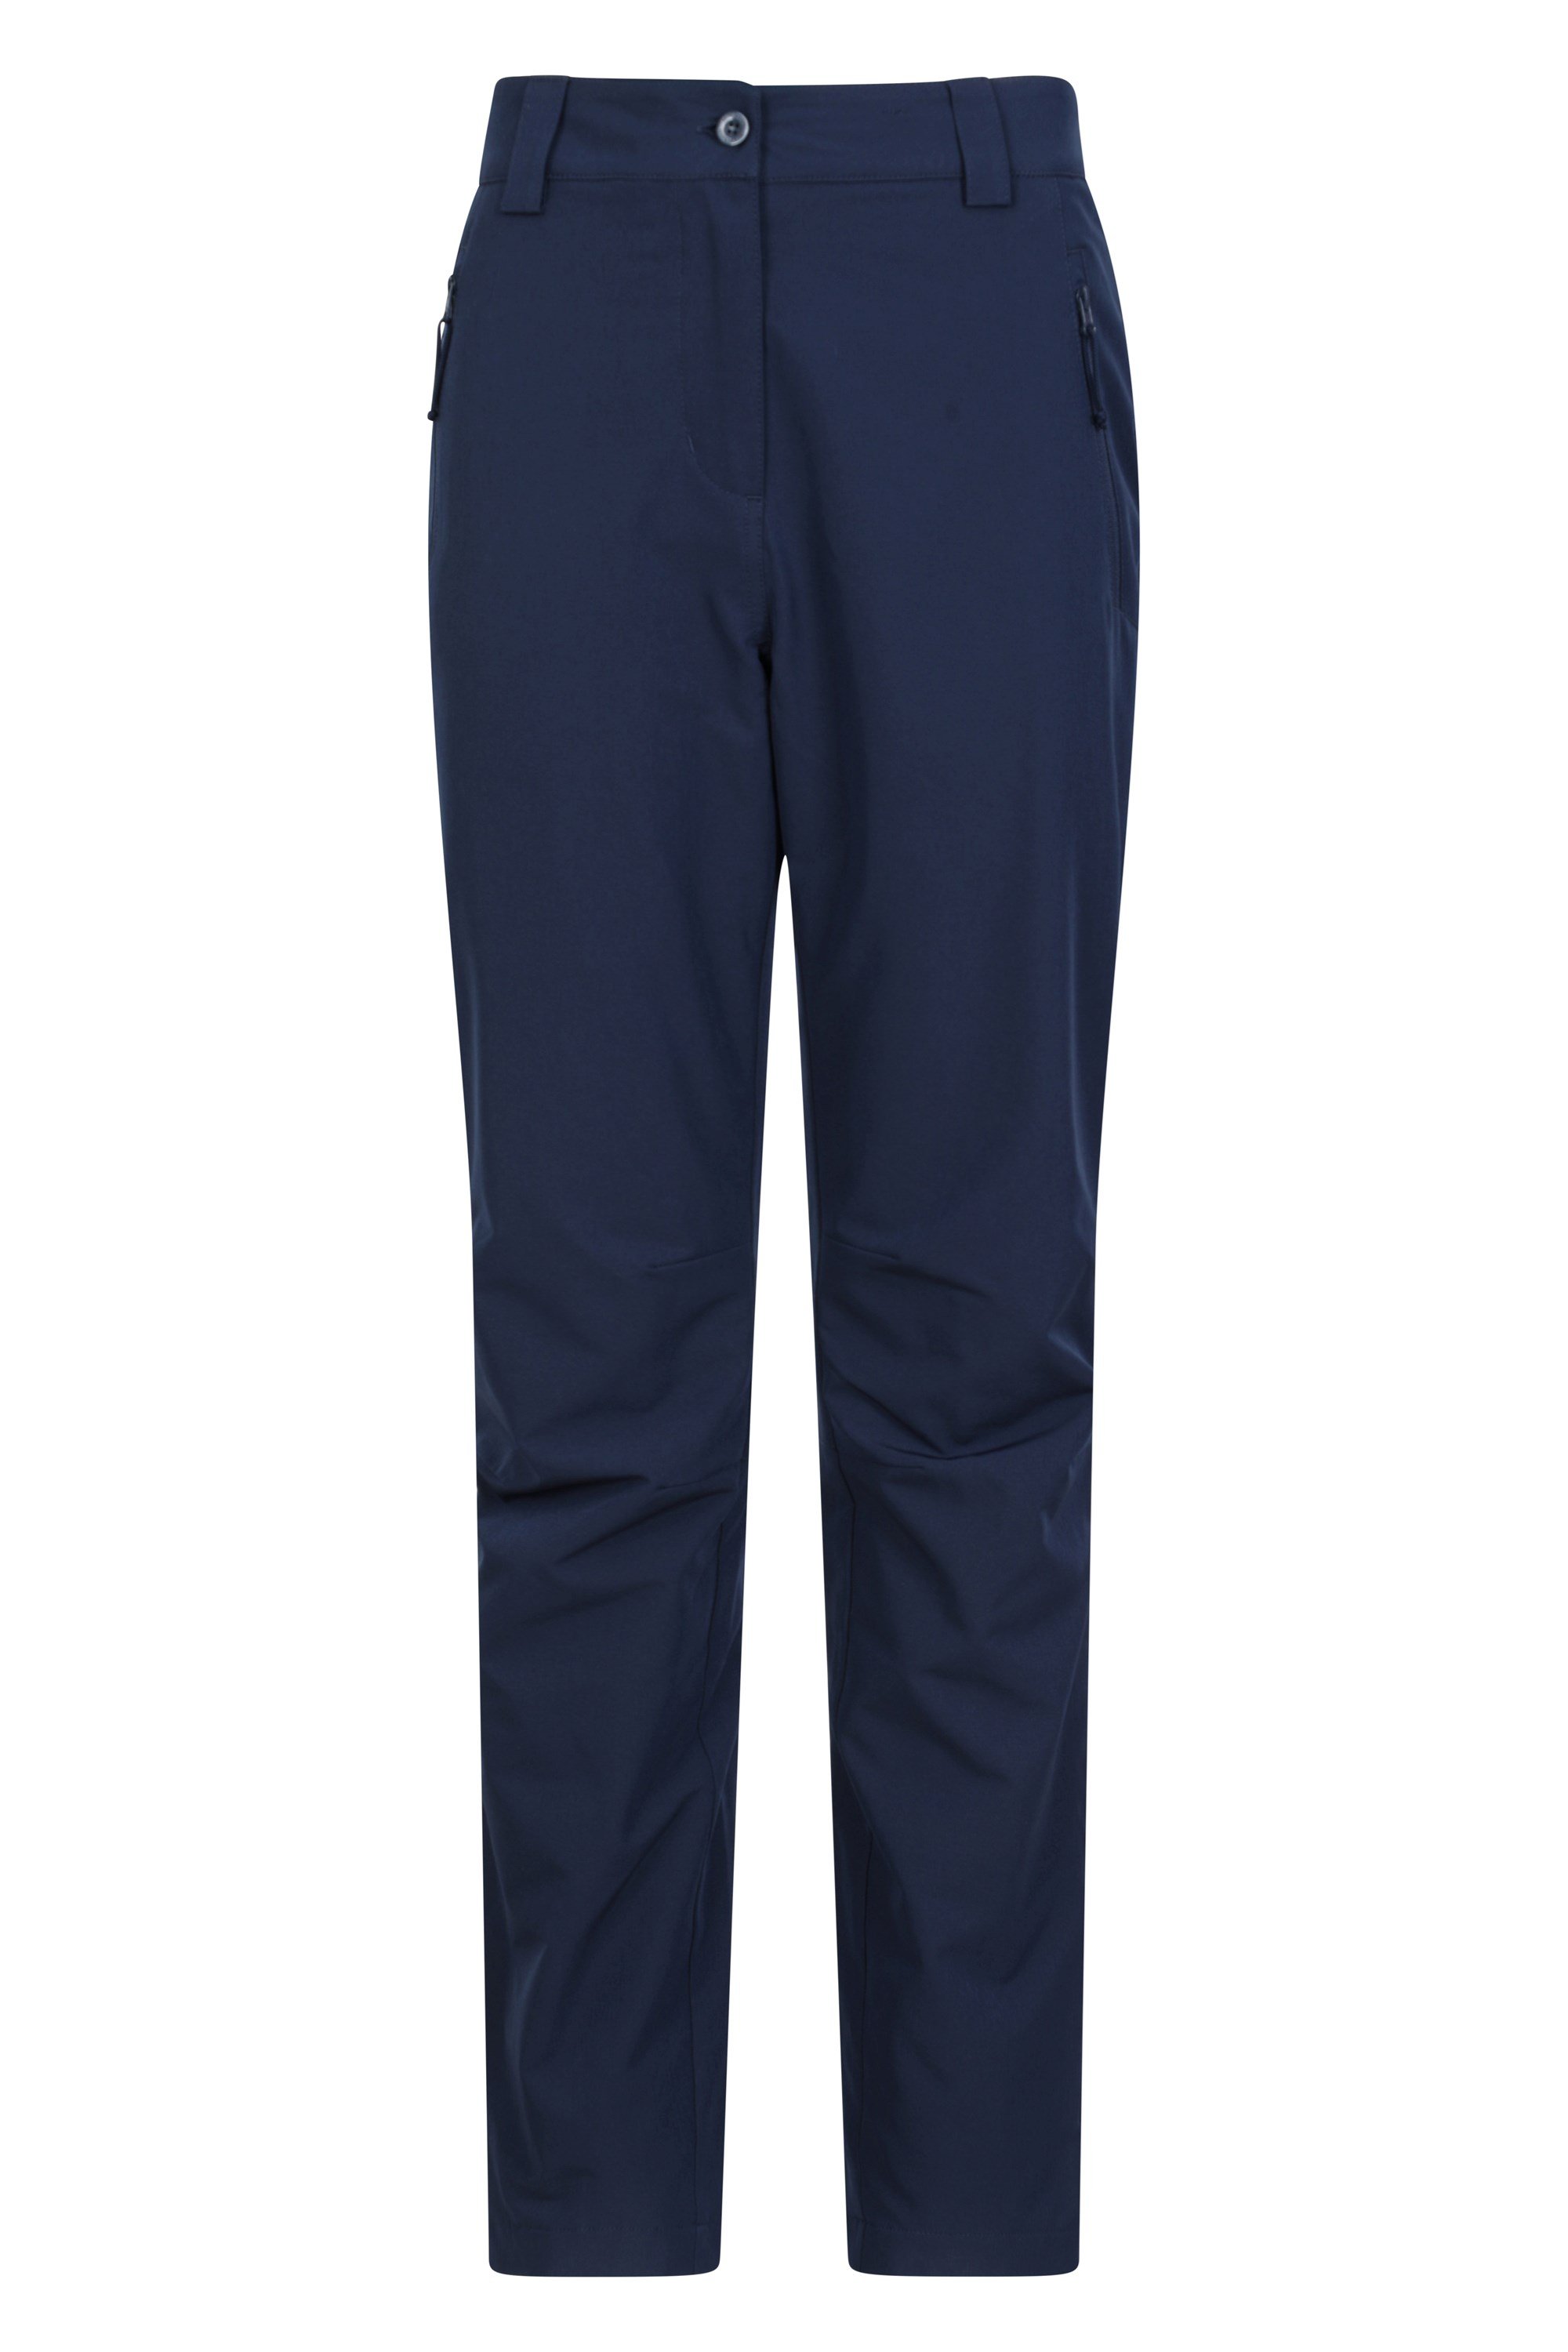 Arctic II Fleece Lined Stretch Womens Trousers Long Length Navy